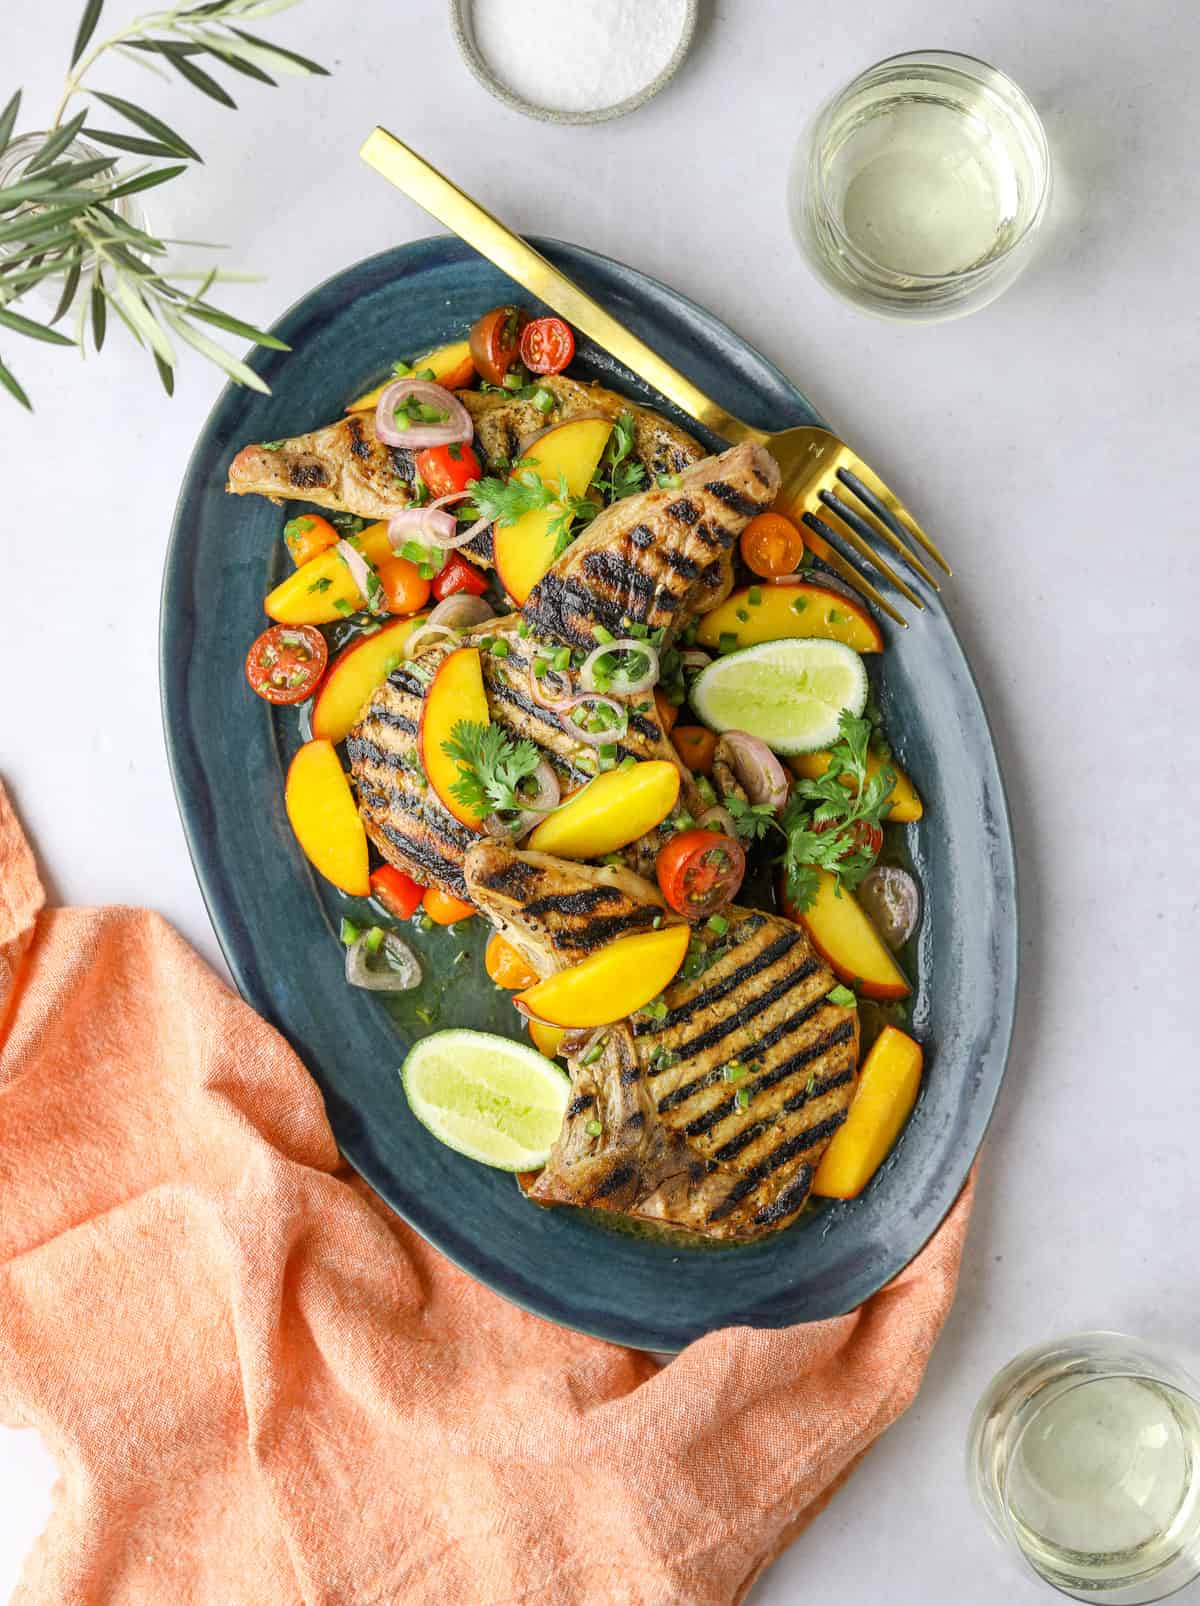 https://cravingcalifornia.com/wp-content/uploads/2021/06/Grilled-Pork-with-Peaches-and-Jalapen%CC%83o-Salsa-6.jpg